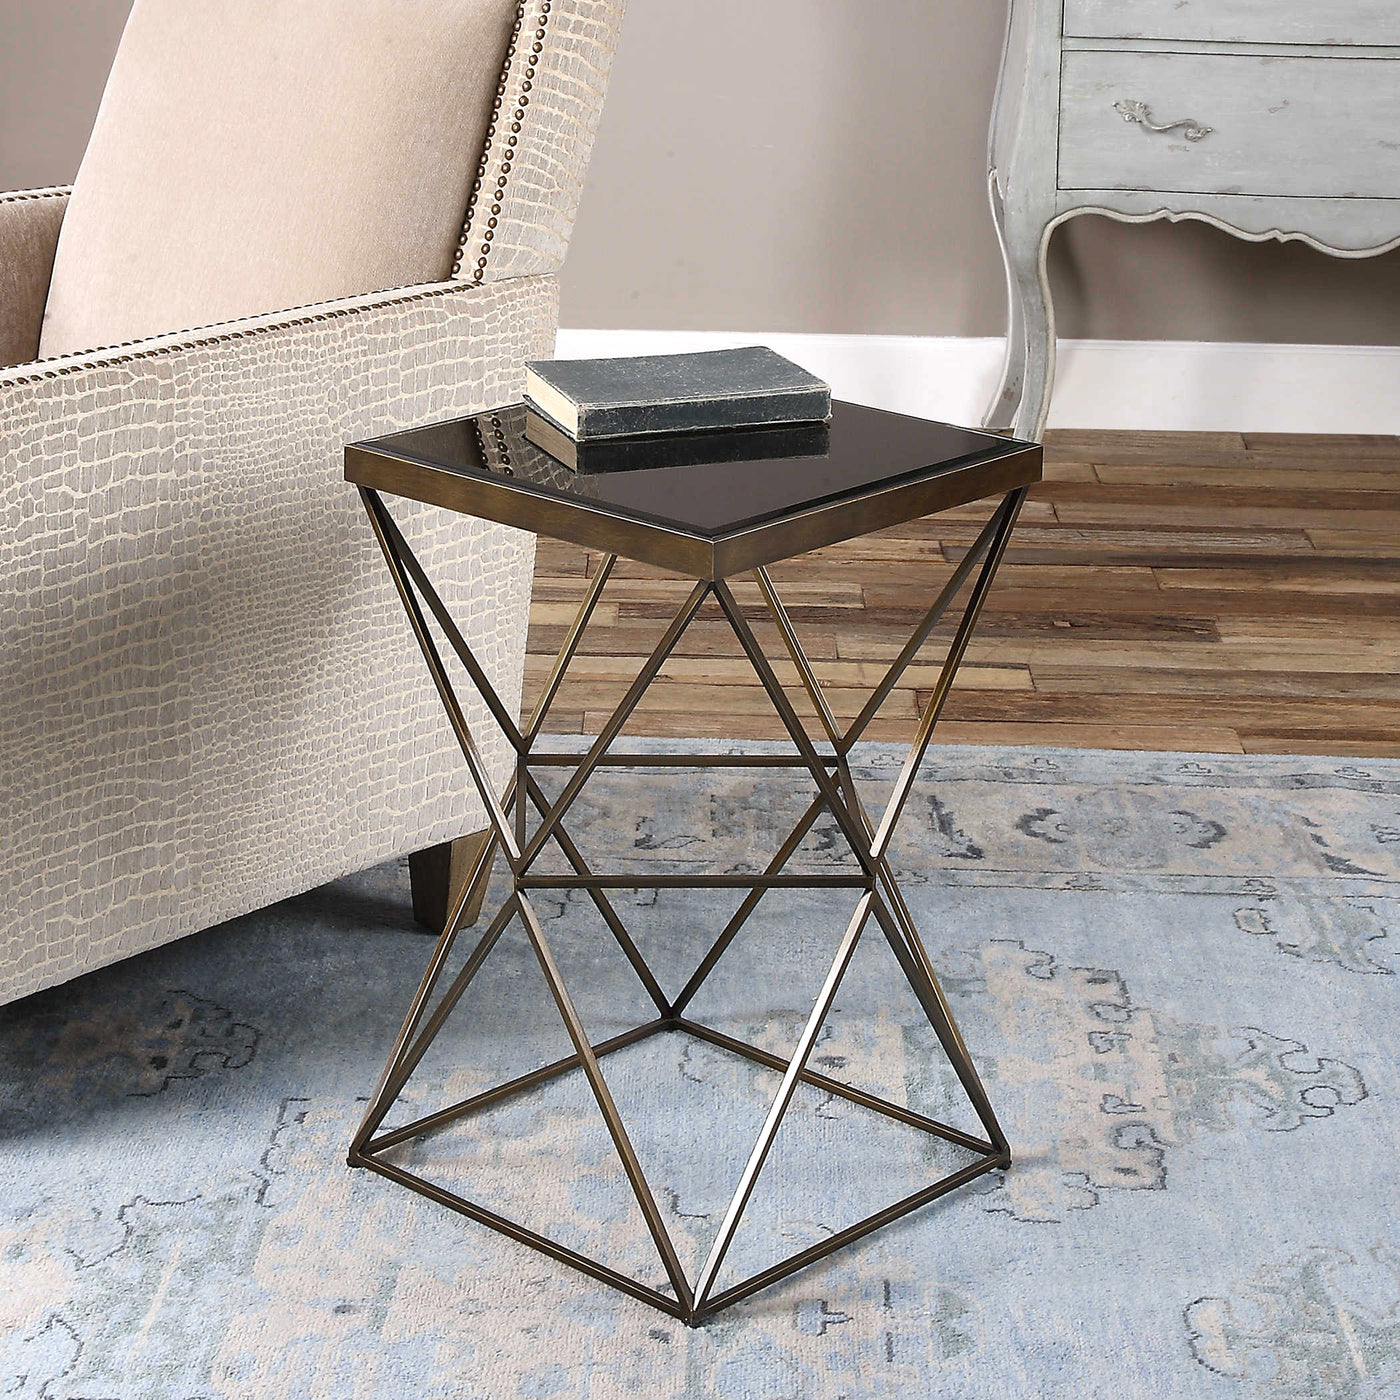 Featuring A Modern Geometric Style Base In Antique Bronze Finished Steel, Topped With Beveled Black Tempered Glass.